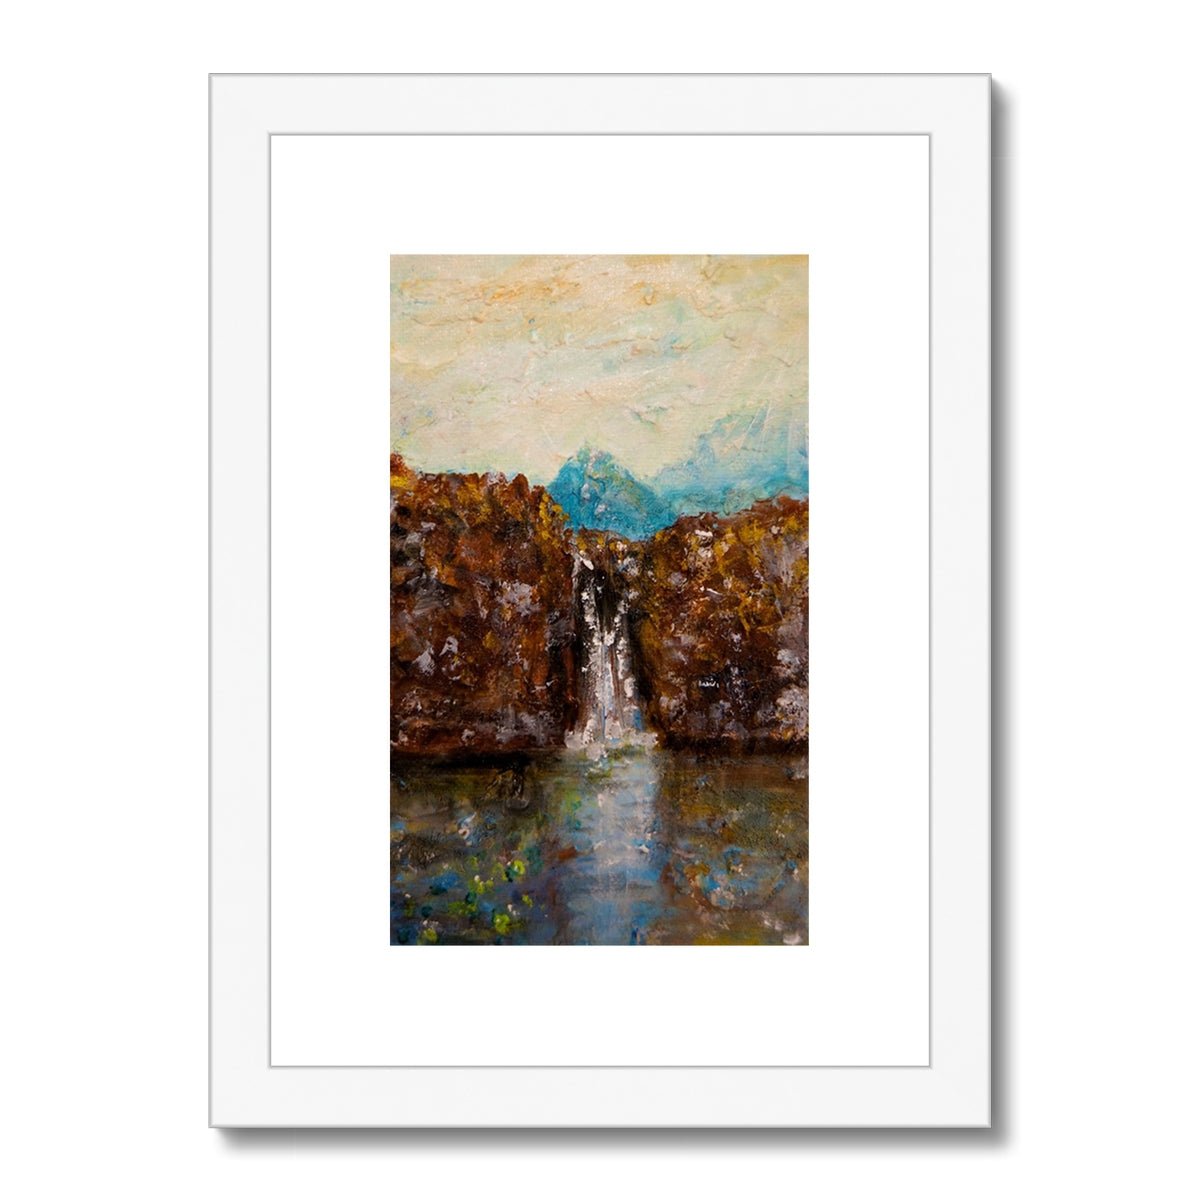 Skye Fairy Pools Painting | Framed & Mounted Prints From Scotland-Framed & Mounted Prints-Skye Art Gallery-A4 Portrait-White Frame-Paintings, Prints, Homeware, Art Gifts From Scotland By Scottish Artist Kevin Hunter